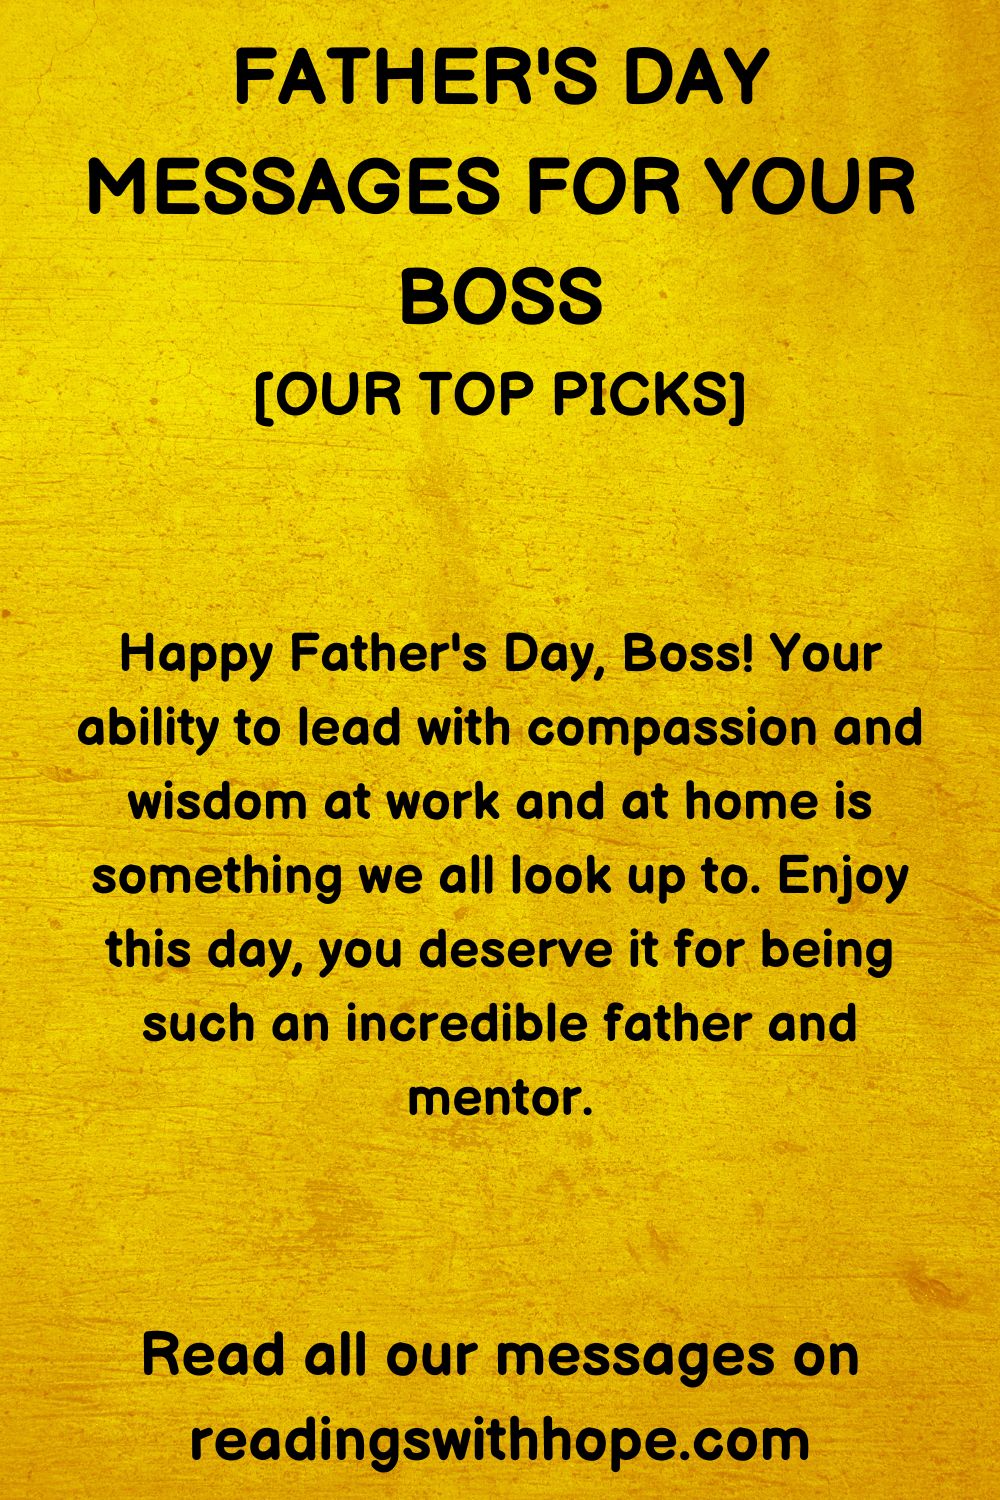 39 Father's Day Messages For Your Boss